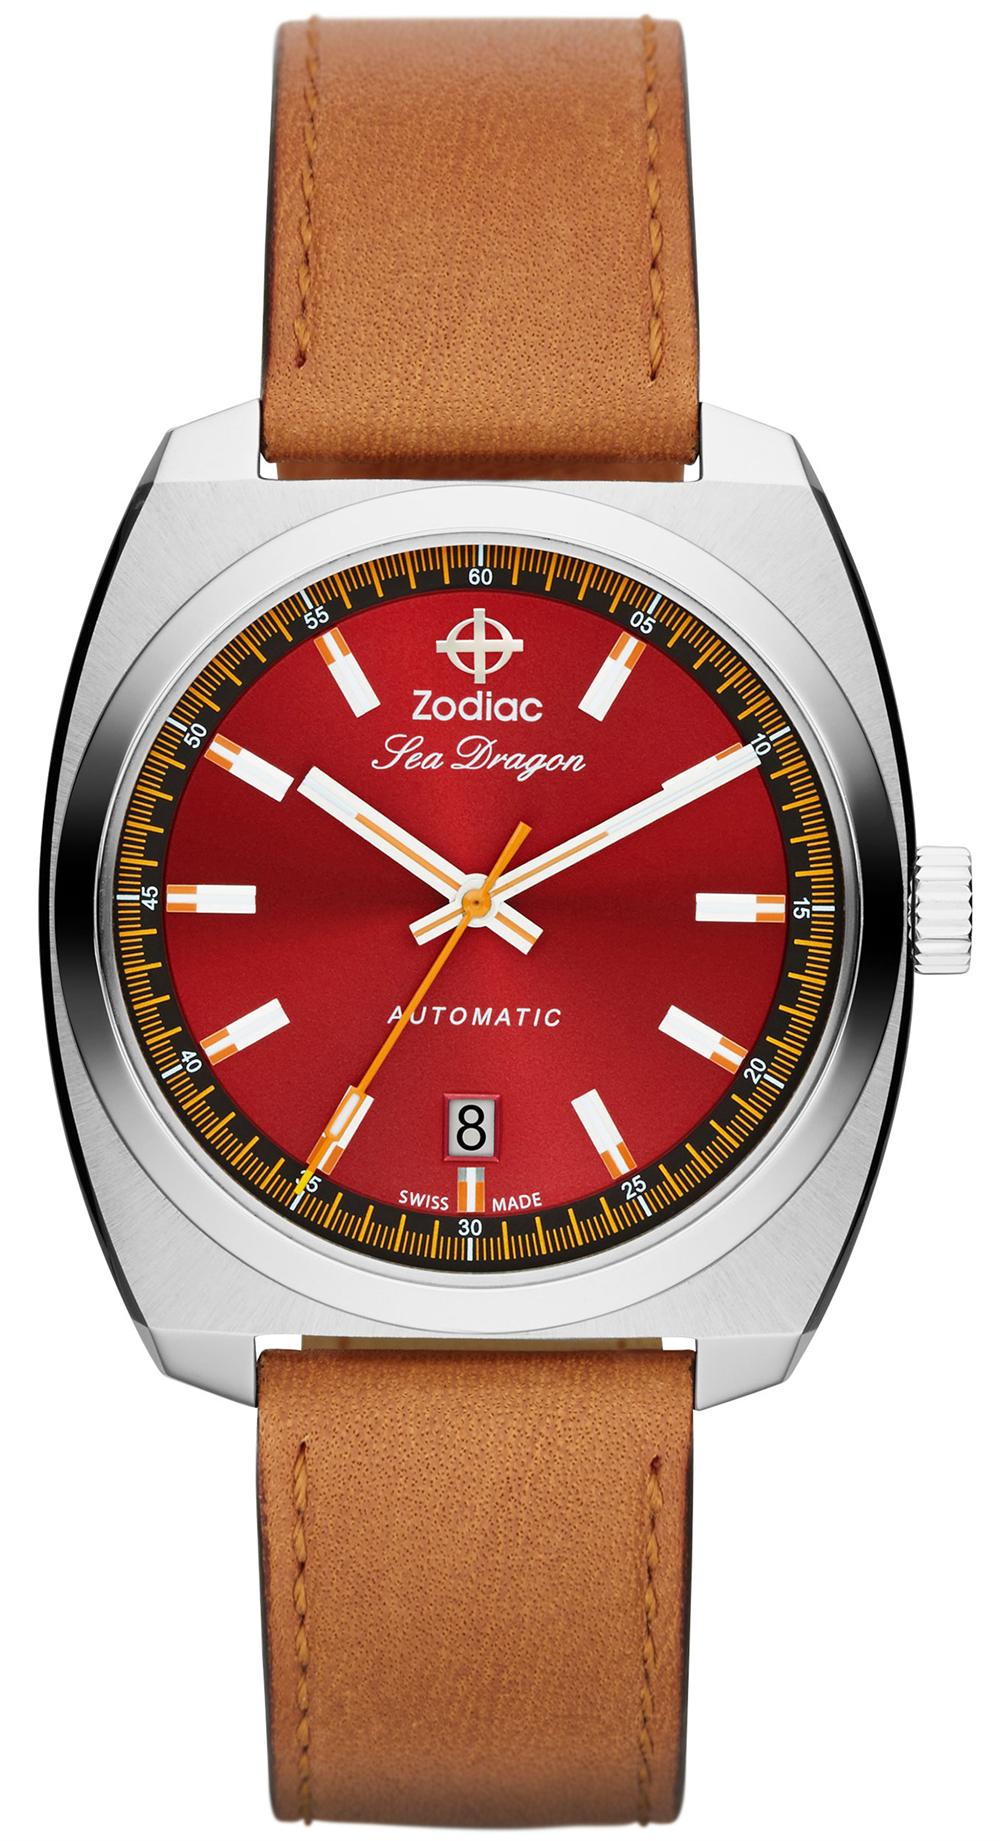 SDRG AUTO RED DIAL STEEL CASE WITH BROWN STRAP